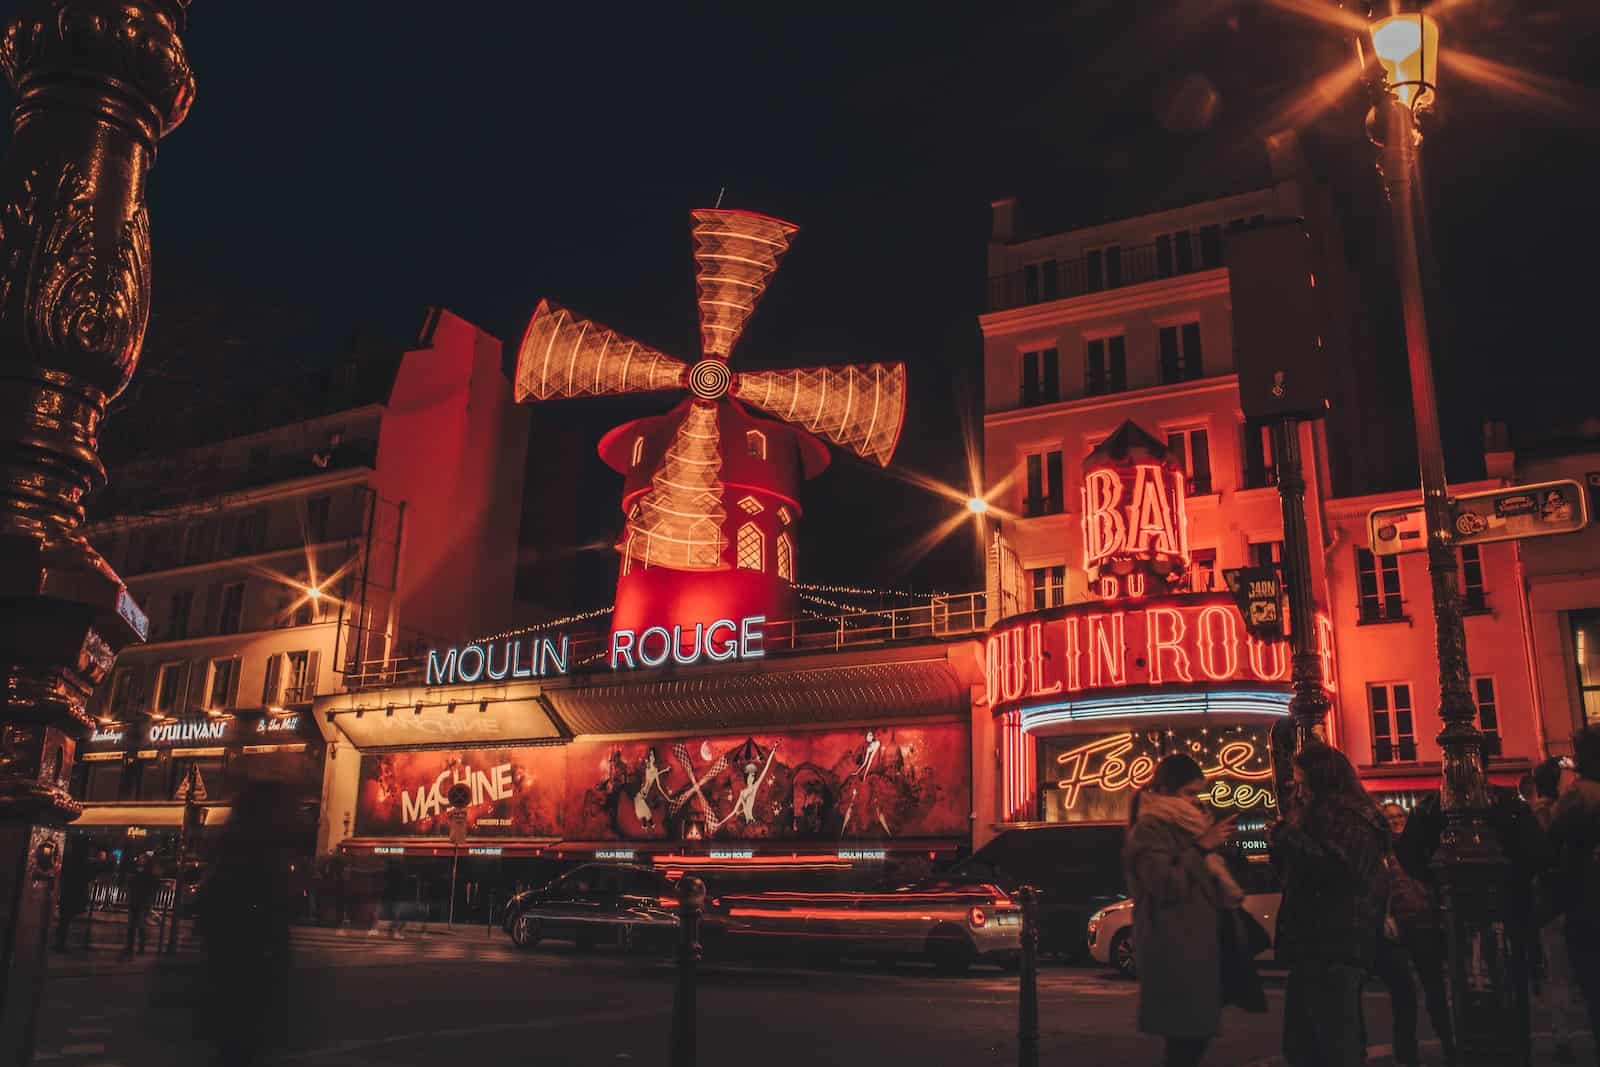 Moulin Rouge building during nighttime